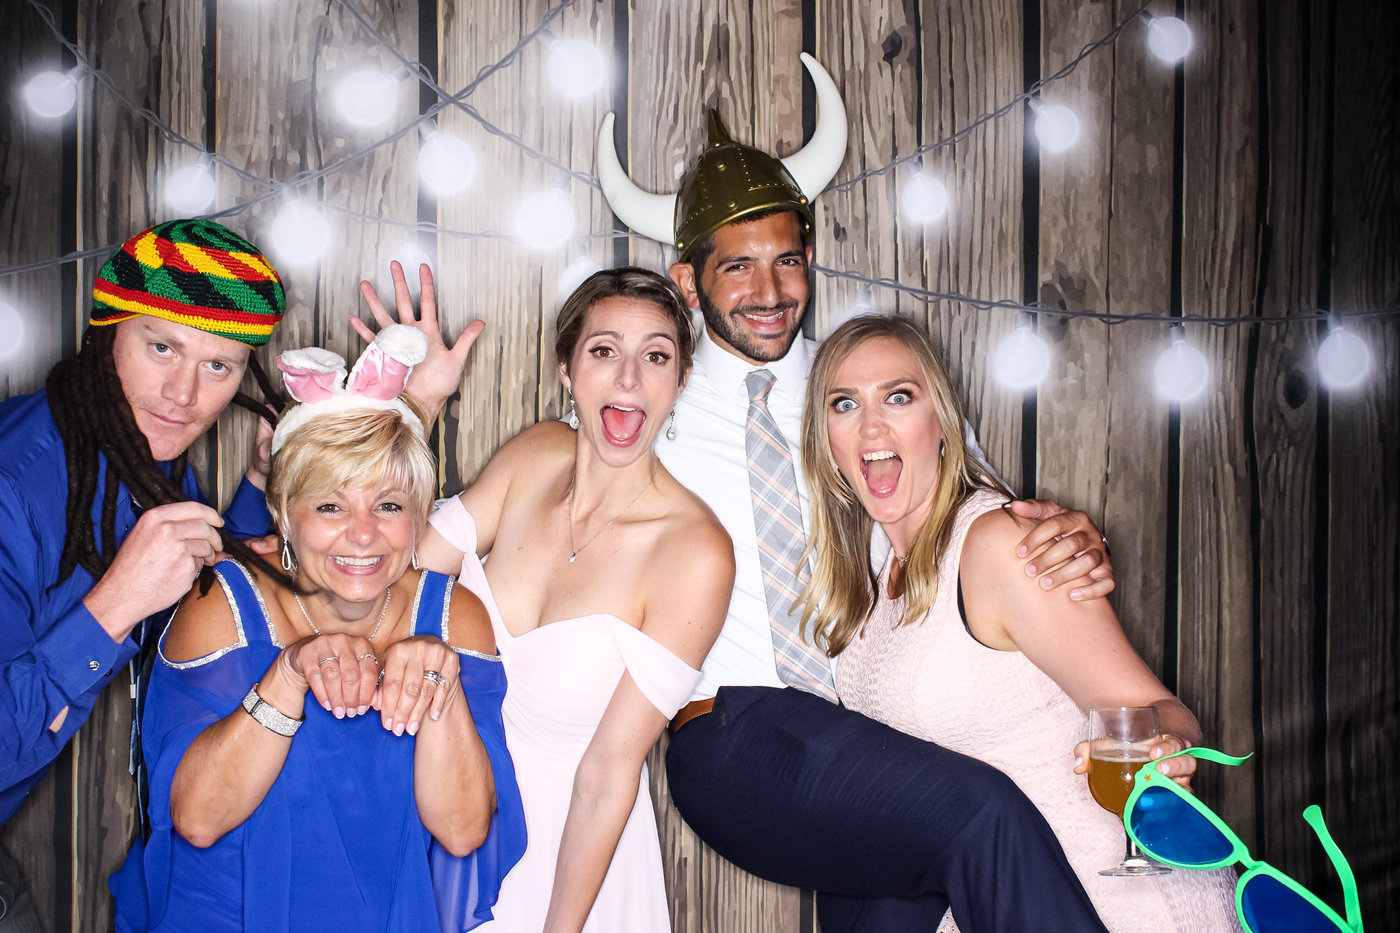 photo booth picture of a bride and groom with their family and friends holding each other and making funny faces while wearing silly props against a wood backdrop with string lights